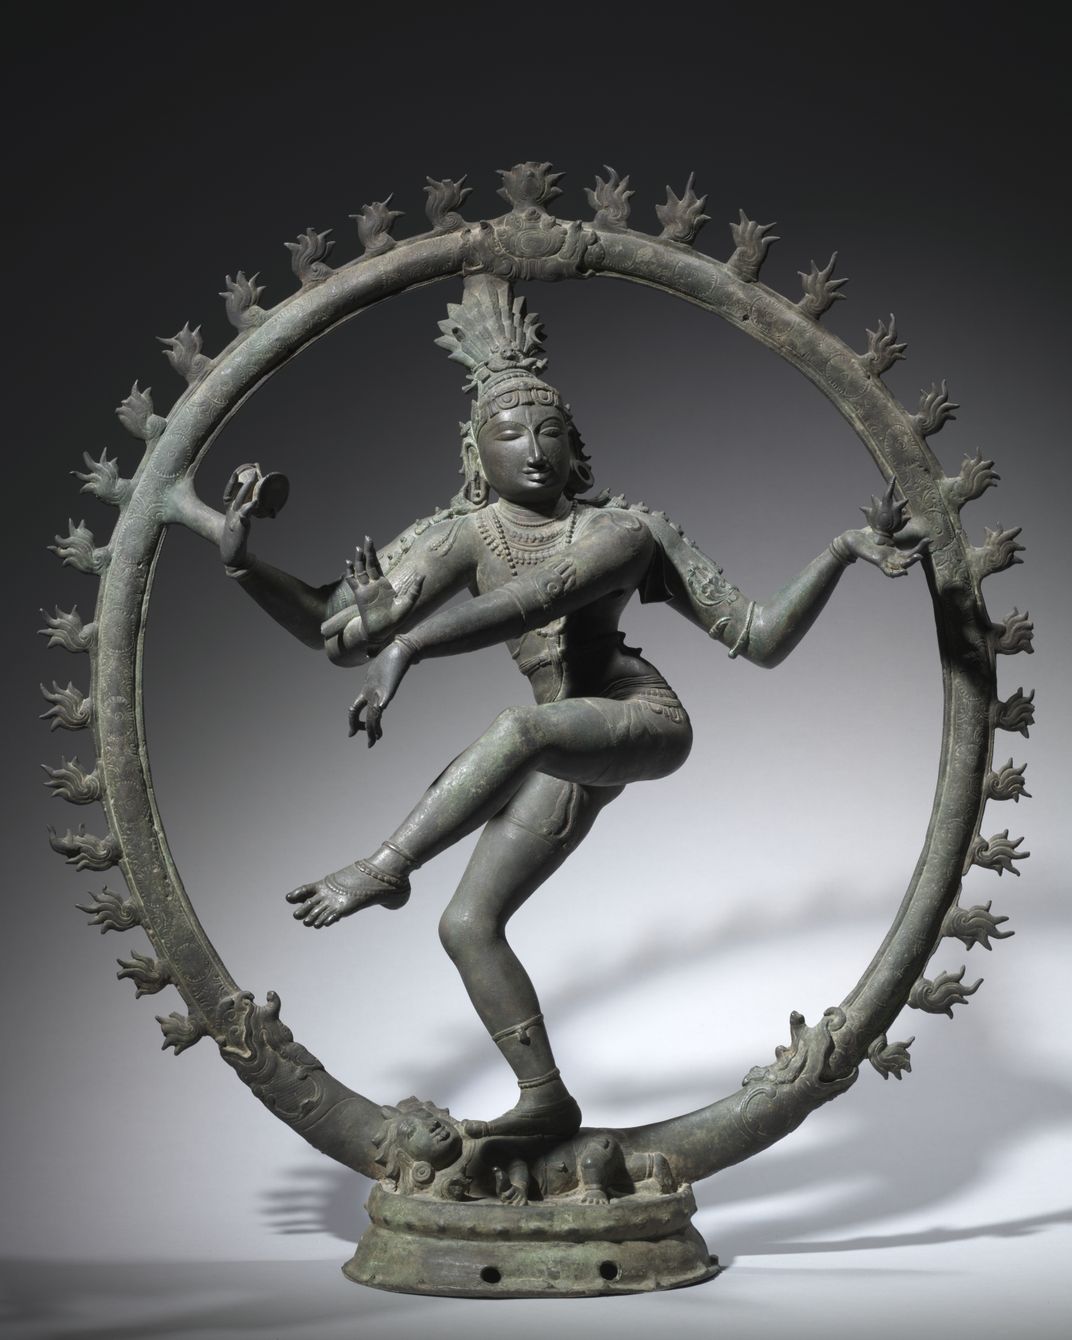 A statue of Shiva with moving limbs